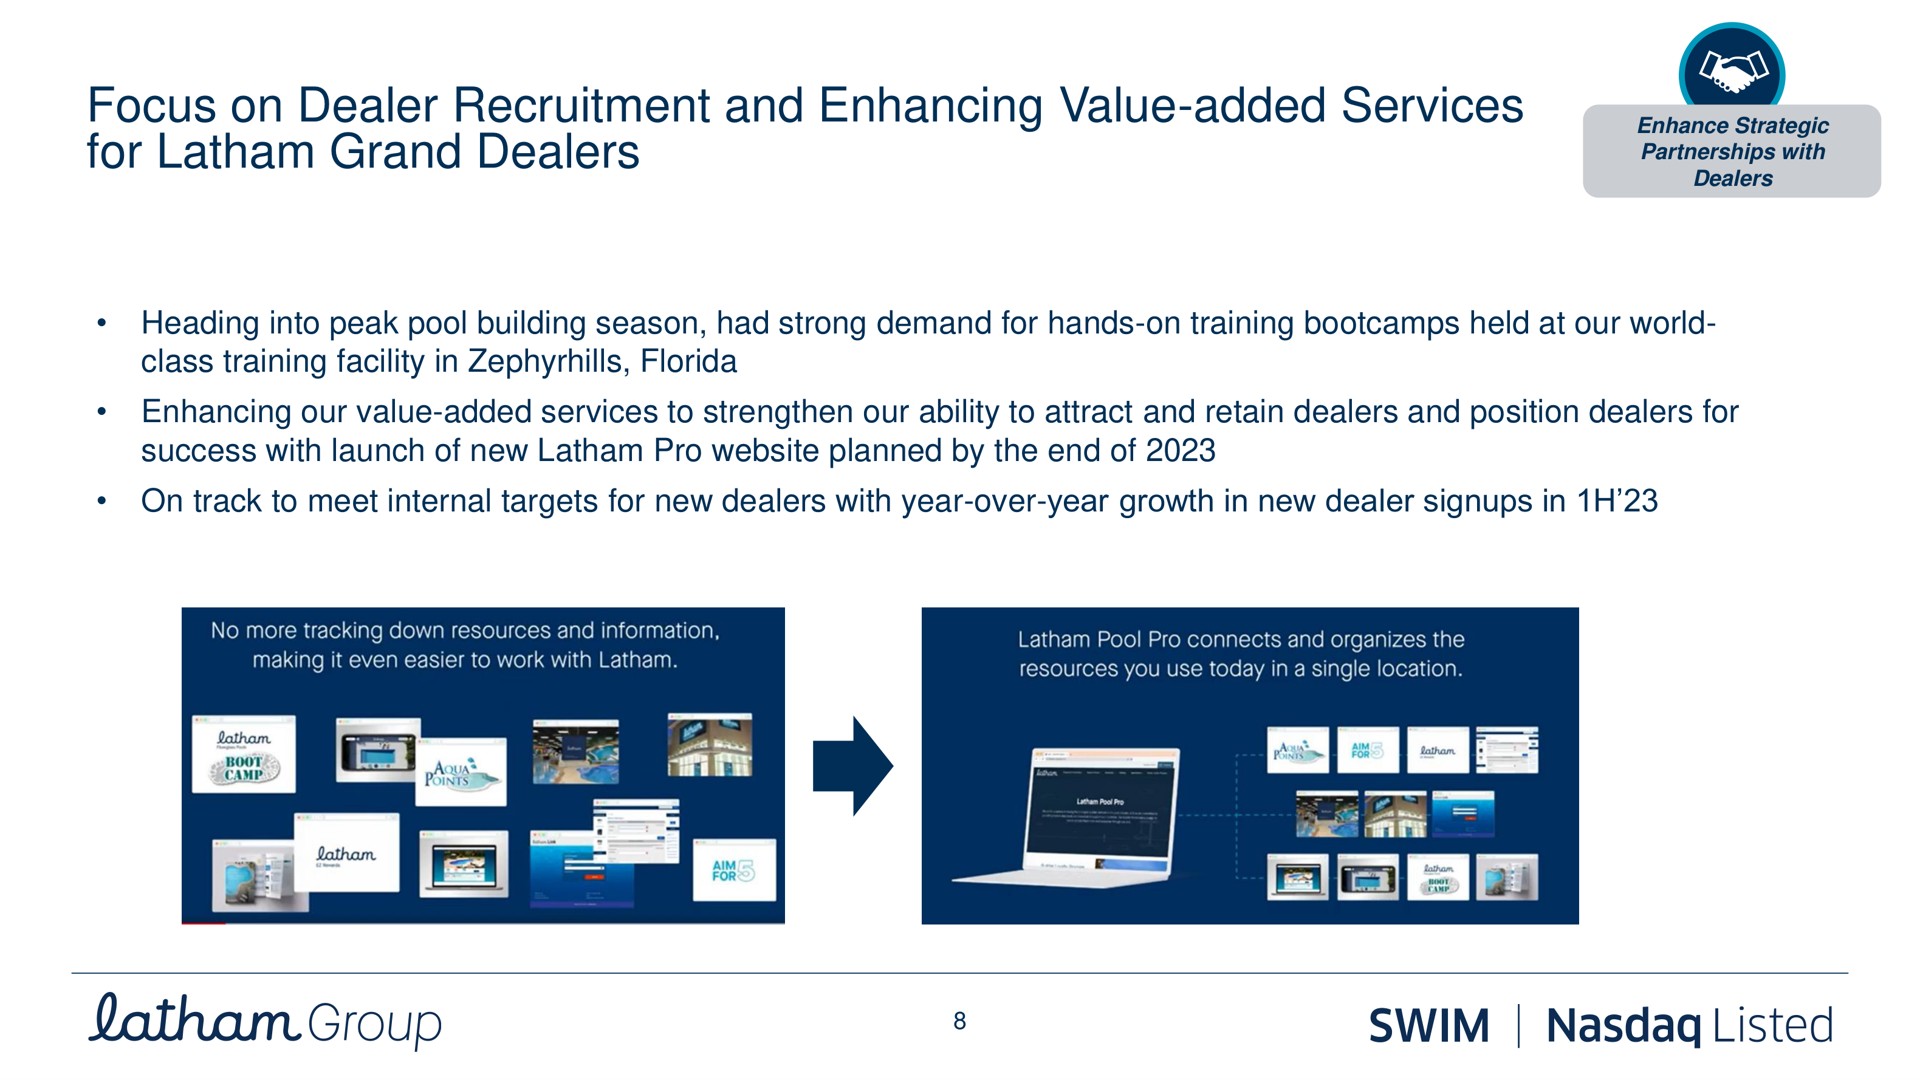 focus on dealer recruitment and enhancing value added services for grand dealers enhance strategic group swim listed | Latham Pool Company